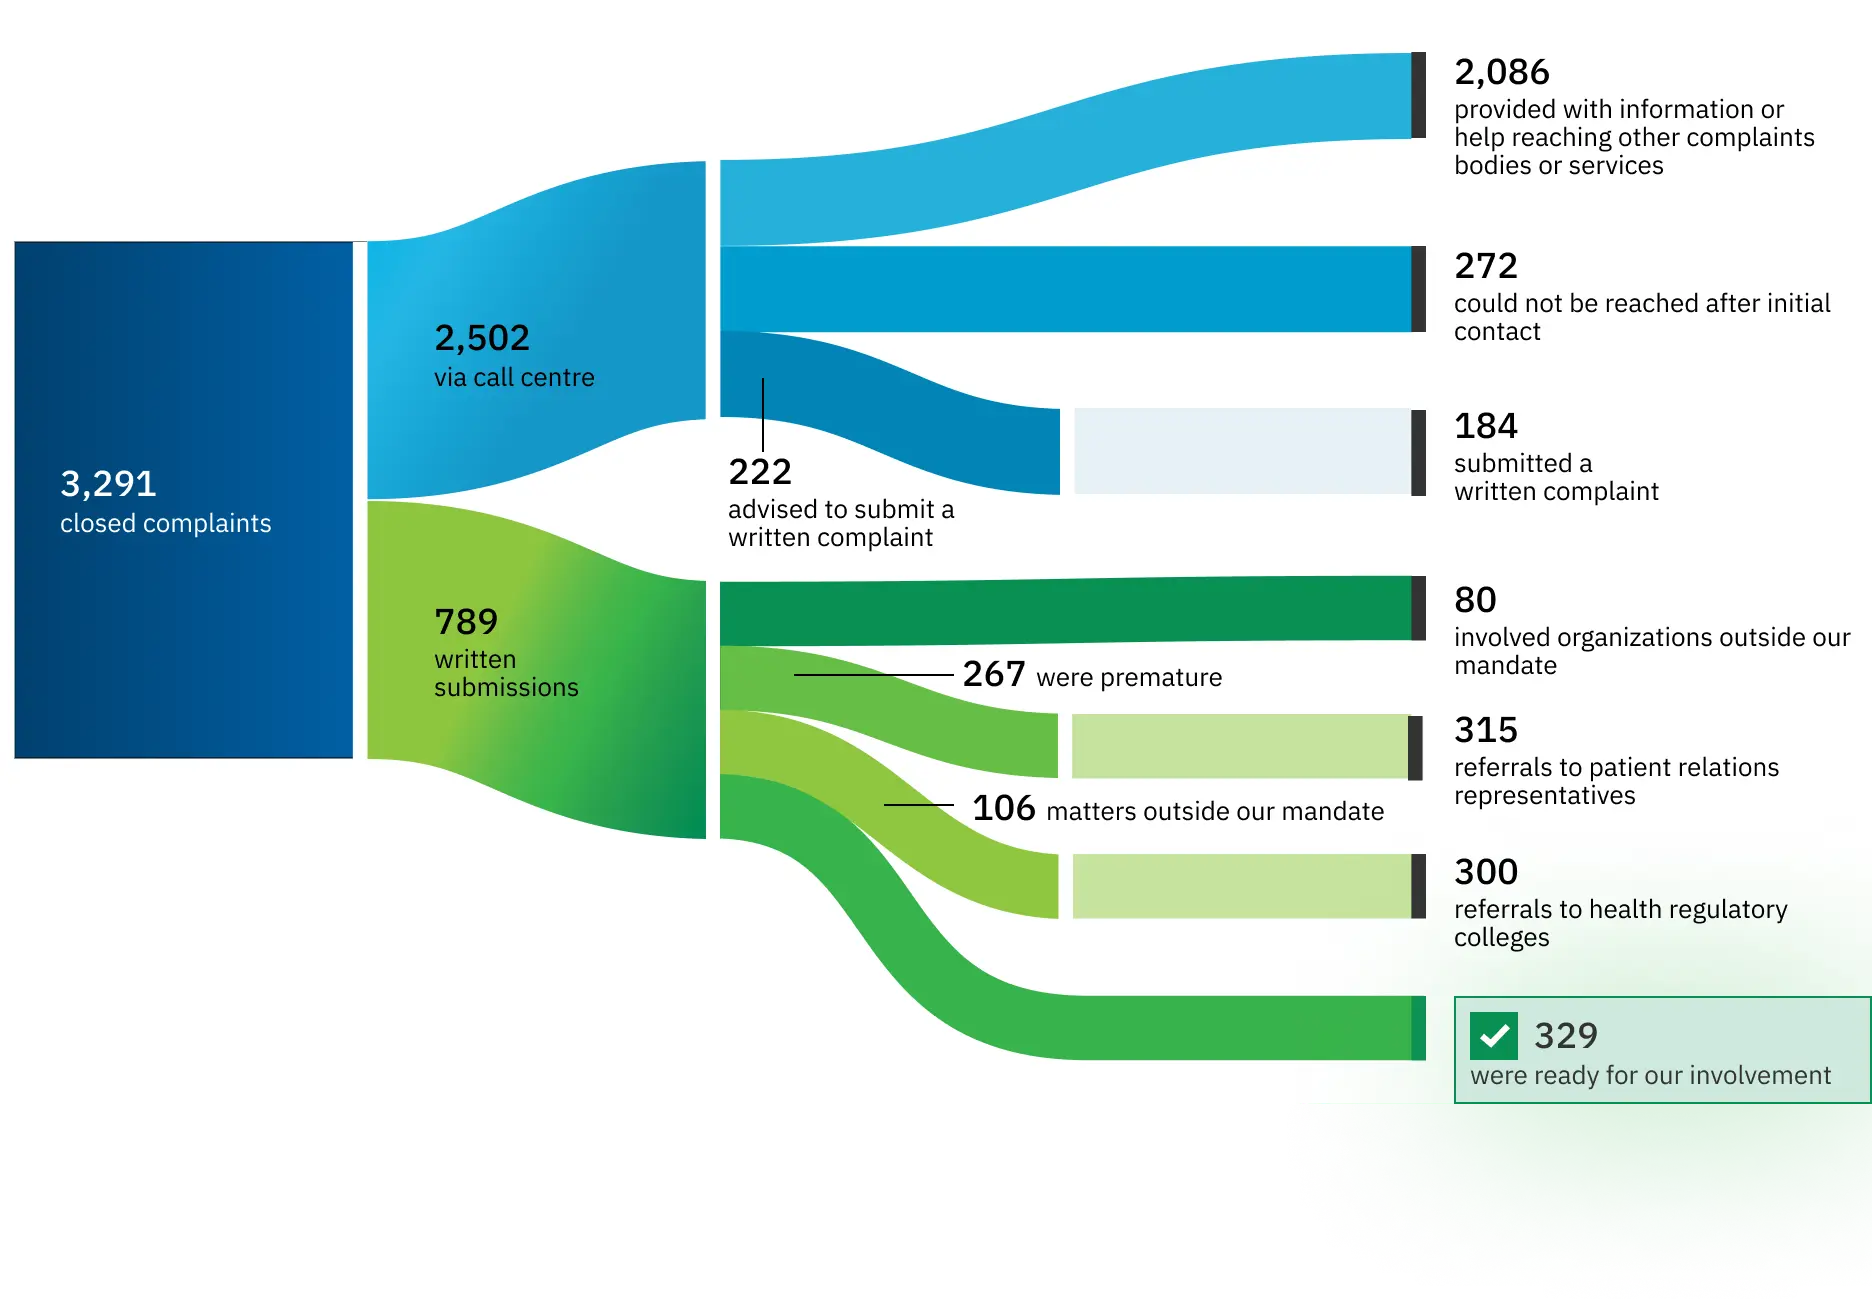 Flow chart shows how 3,291 complaints were closed. Some complaints were referred to other oversight bodies or received help in reaching certain contacts, while 329 of the closed complaints were ready for our involvement.